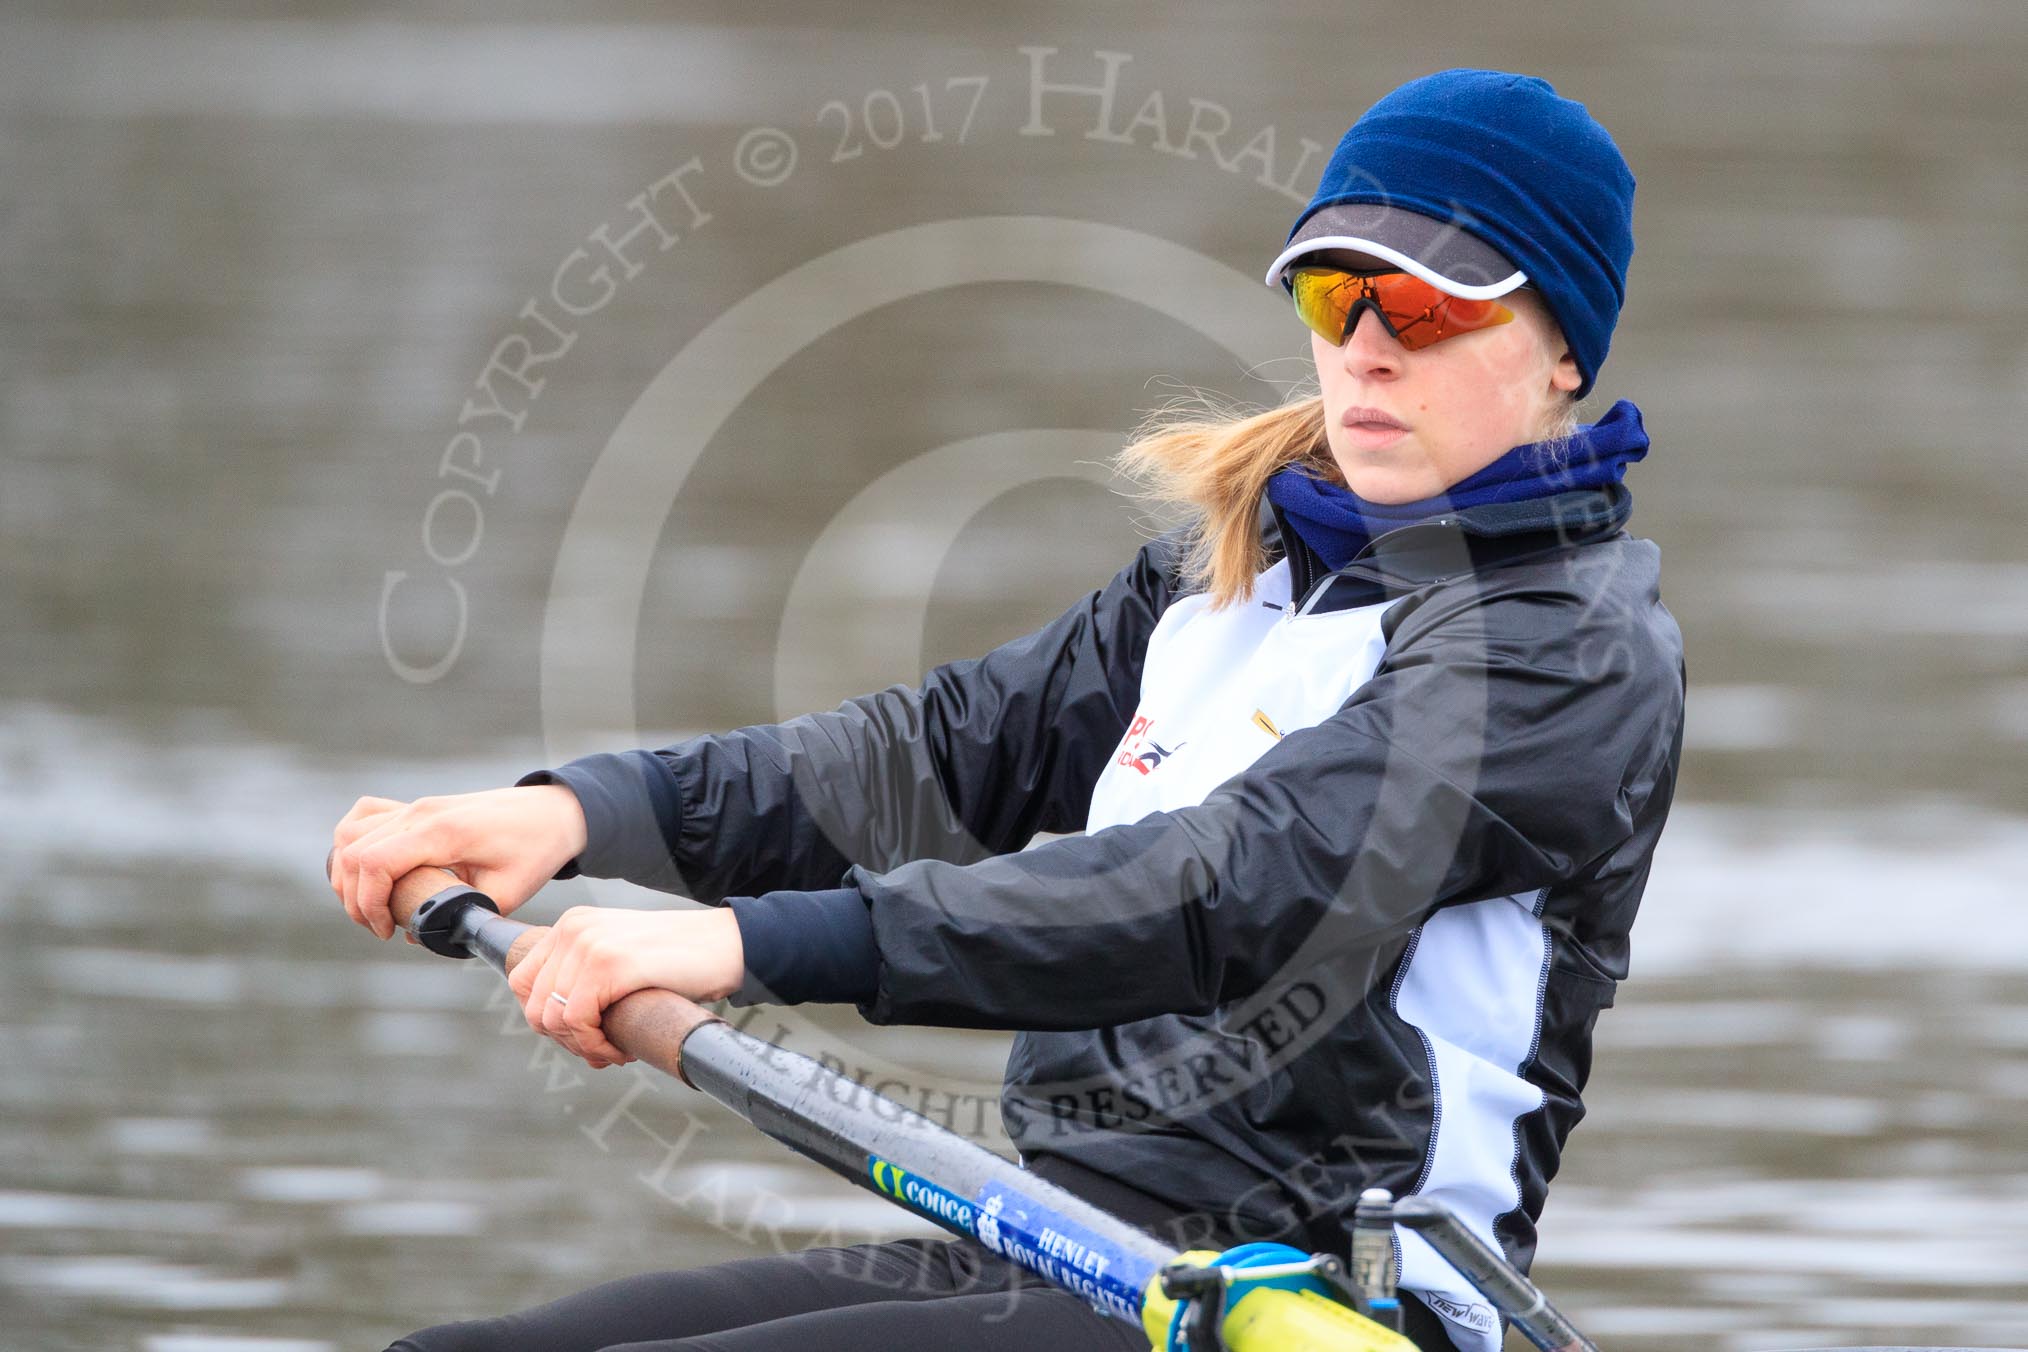 The Women's Boat Race season 2018 - fixture OUWBC vs. Molesey BC: Molesey's bow Emma Boyns.
River Thames between Putney Bridge and Mortlake,
London SW15,

United Kingdom,
on 04 March 2018 at 13:34, image #33